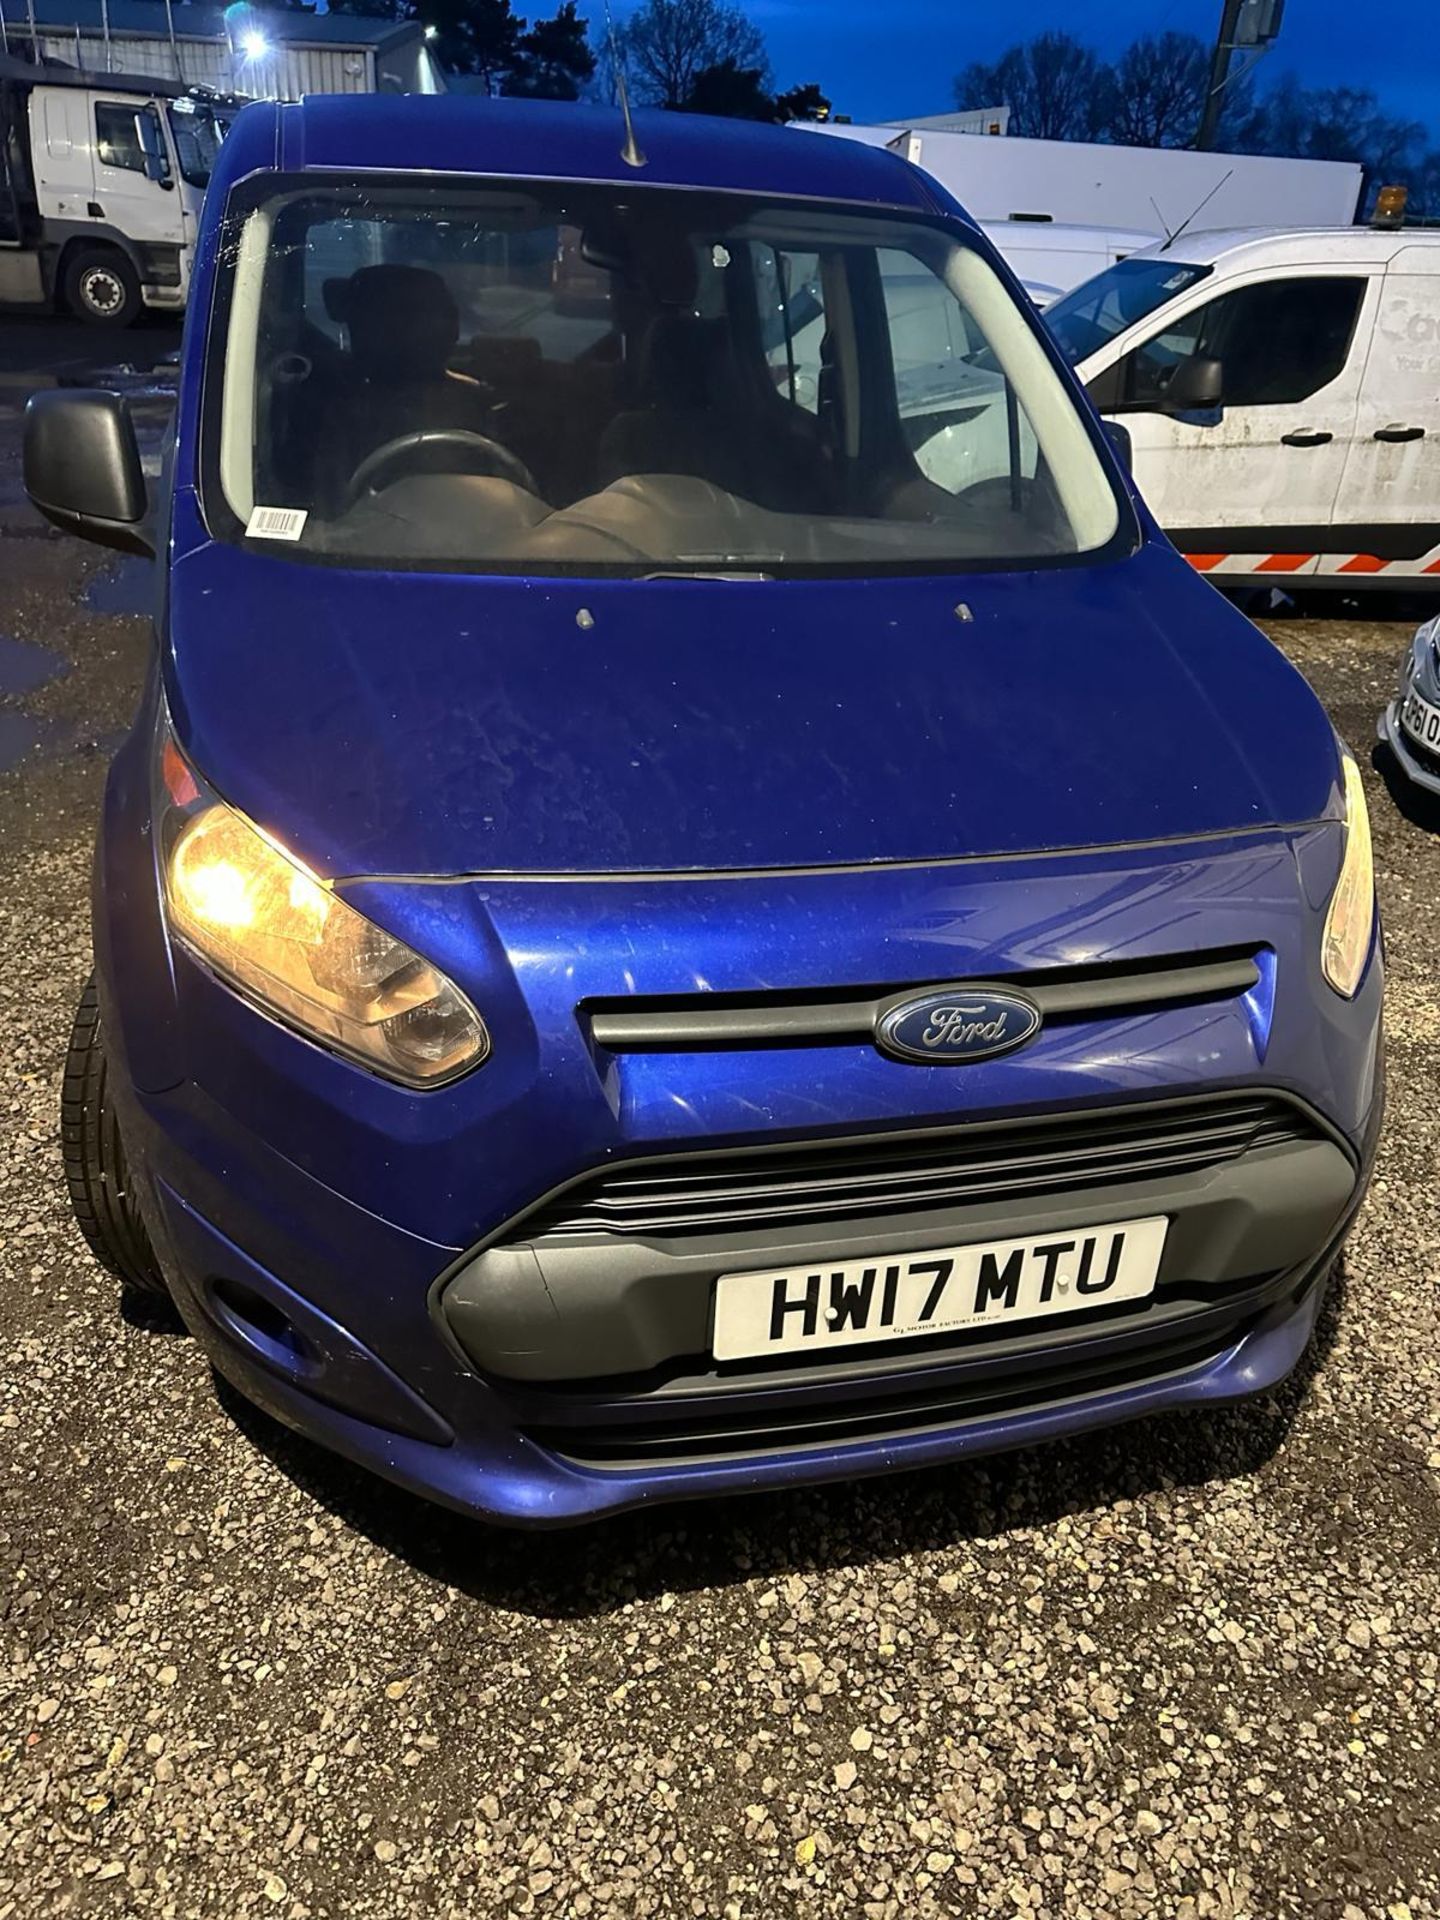 2017 17 FORD TRANSIT CONNECT TOURNEO VAN - 196K MILES - EURO 6 - NO DRIVE. - Image 7 of 8